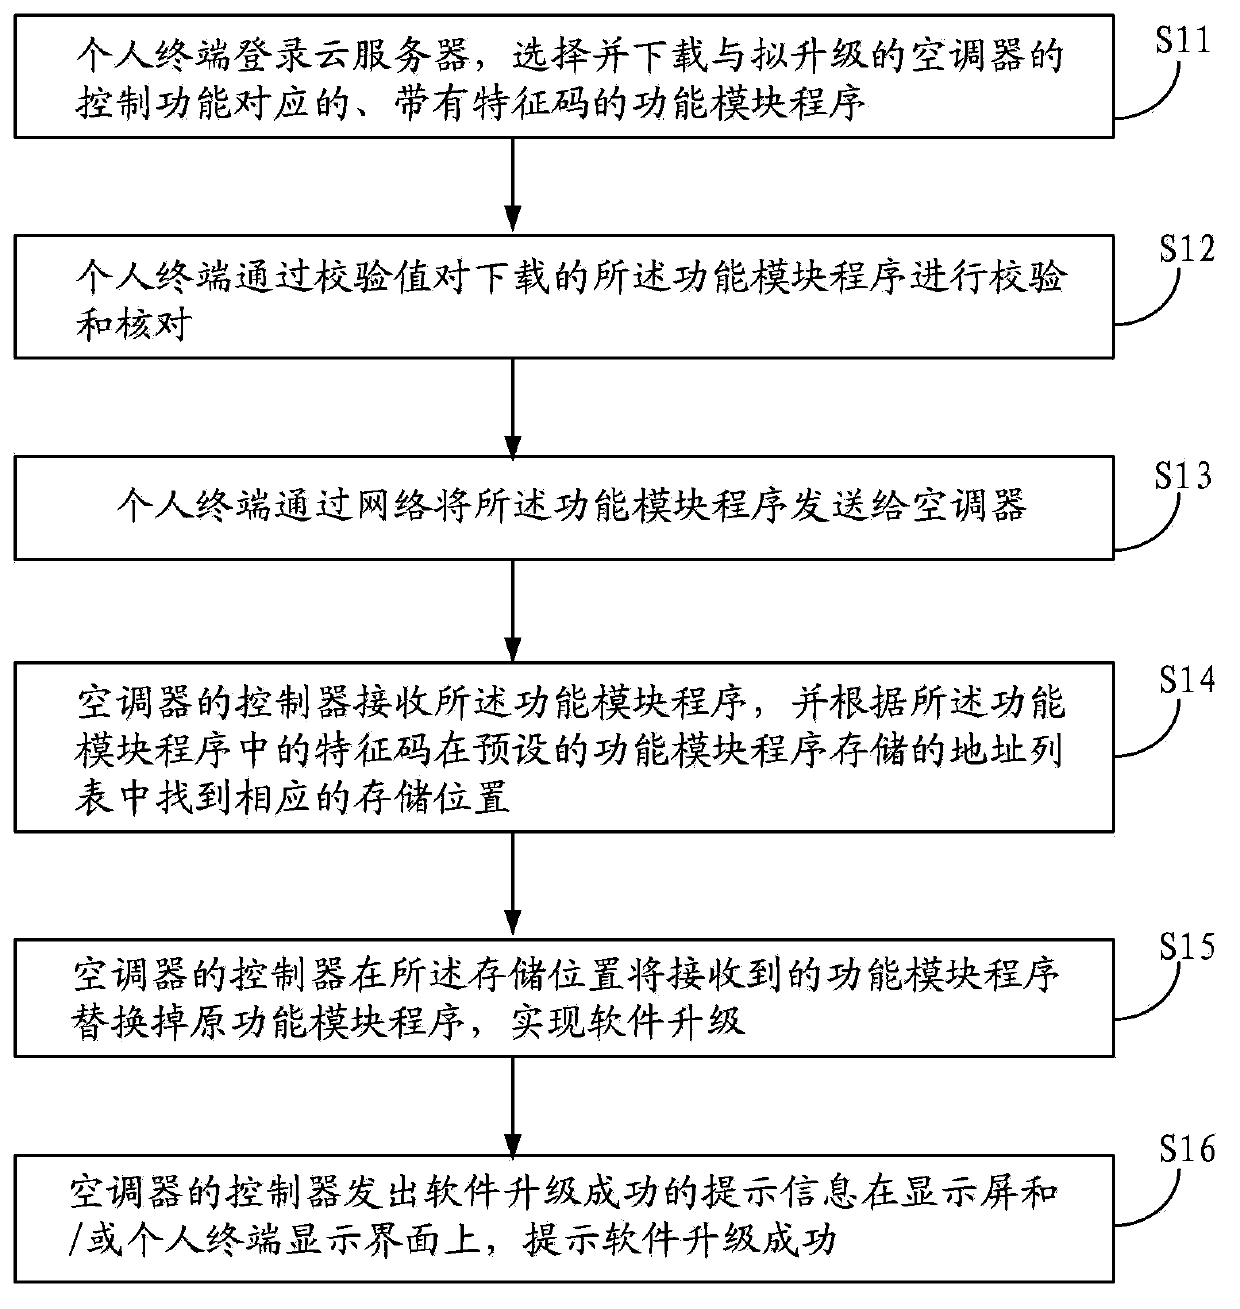 Control method for function upgrading of household appliance product